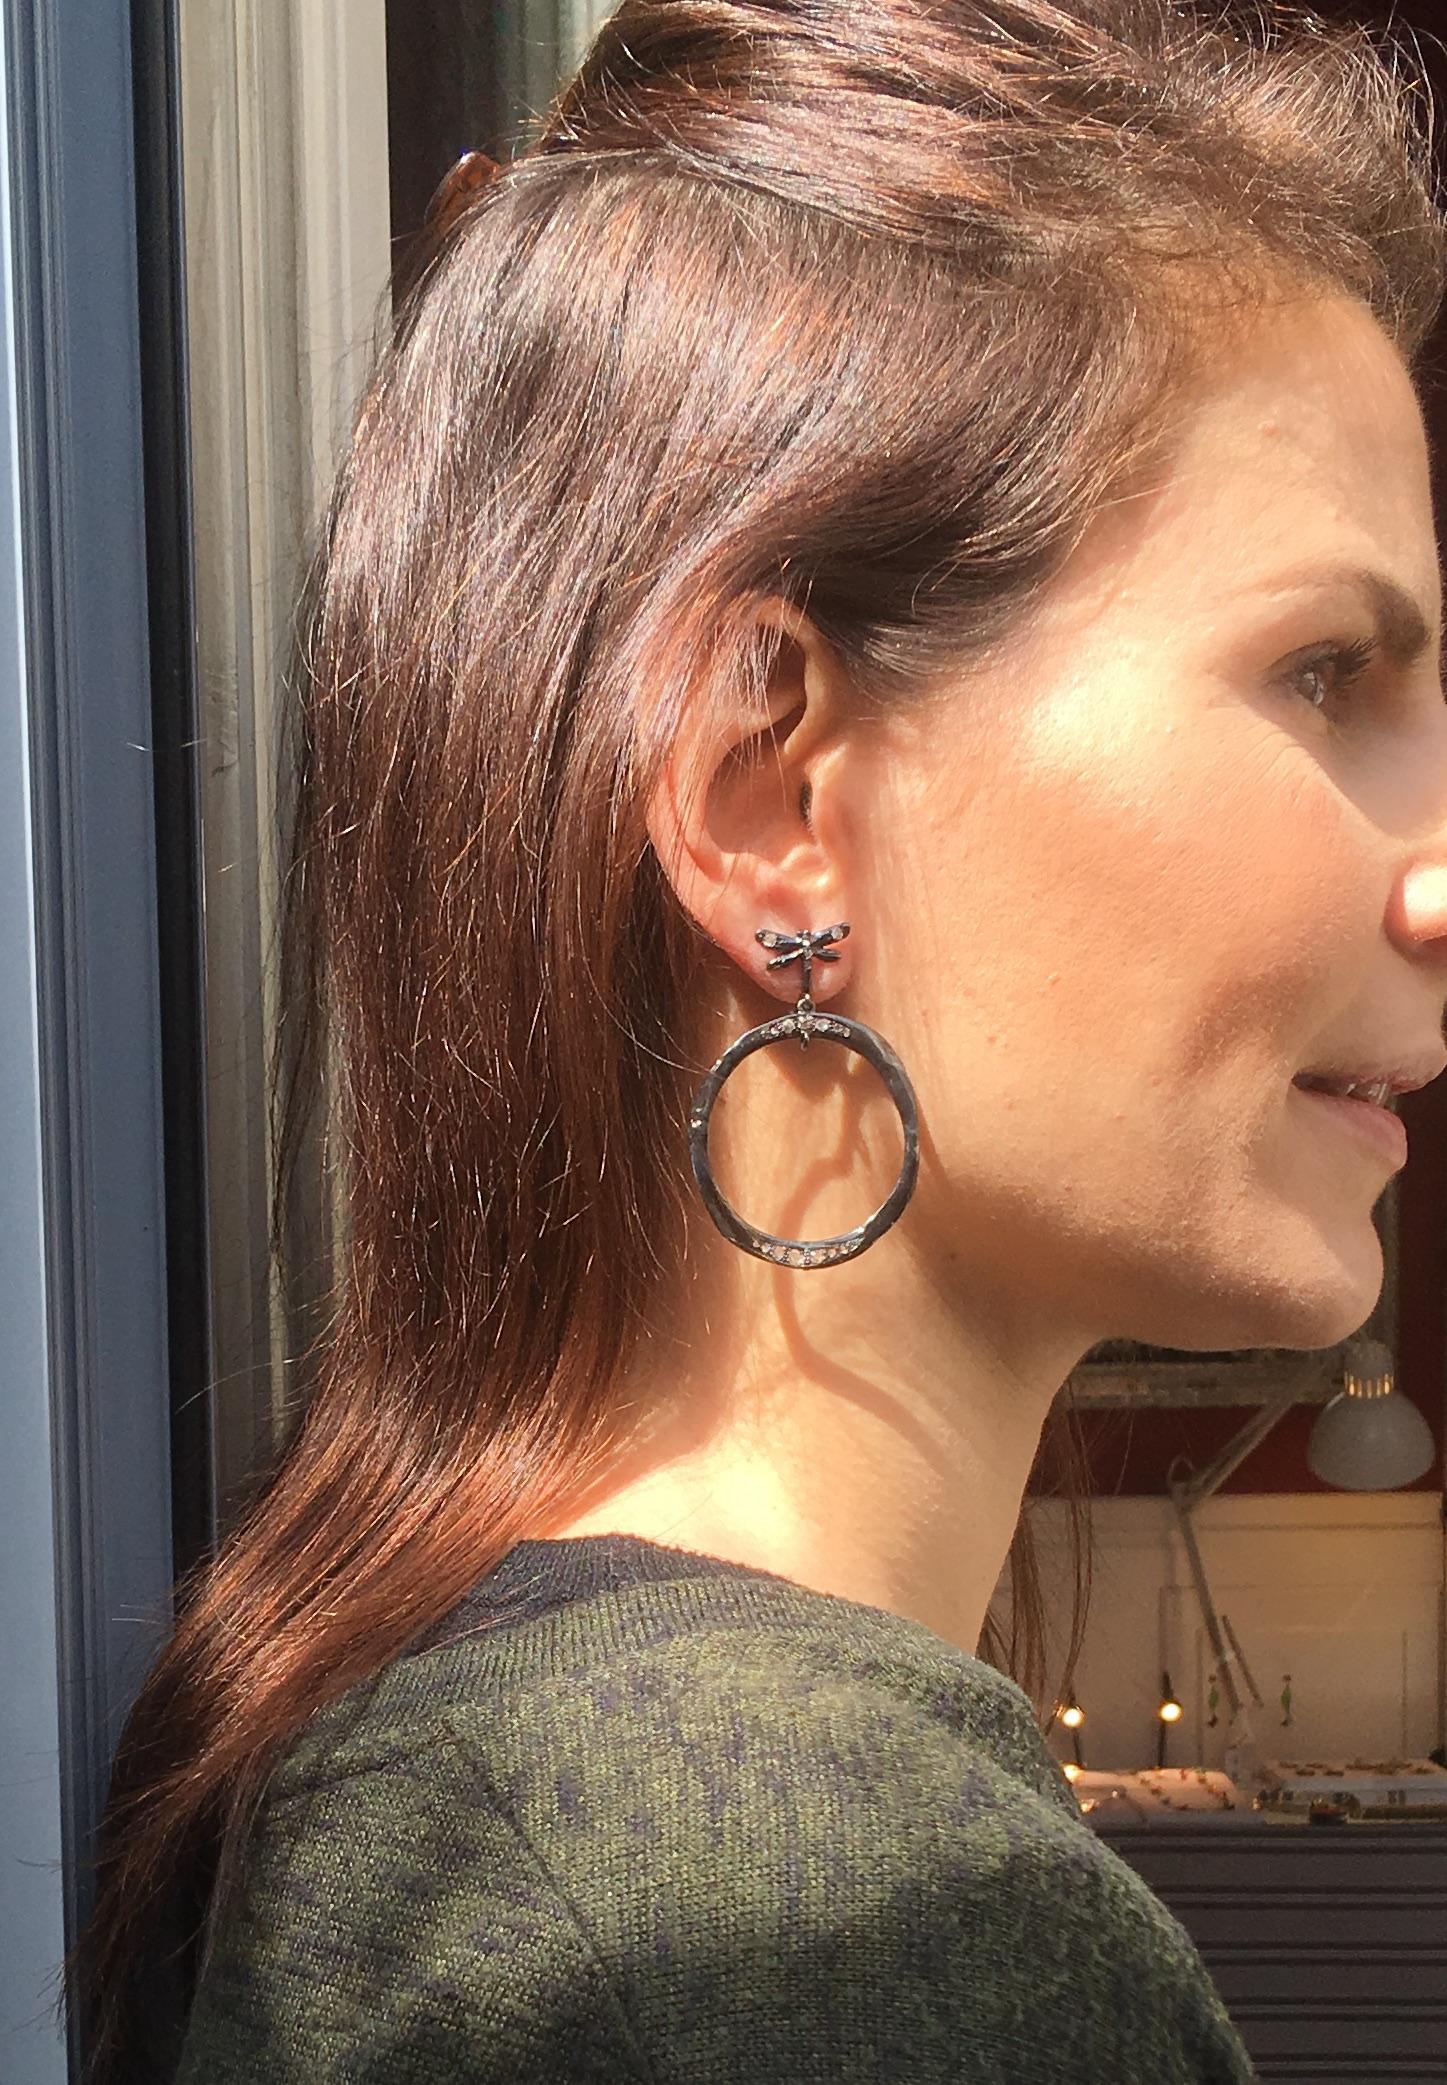 Introducing Rossella Ugolini's Elegant Circular Burnished Silver Earrings adorned with 0.70 Karat Antique Old Mine and Old Cut Diamonds, each featuring a delicate symbol of freedom—the dragonfly. Crafted to perfection, these One-of-a-kind hoop